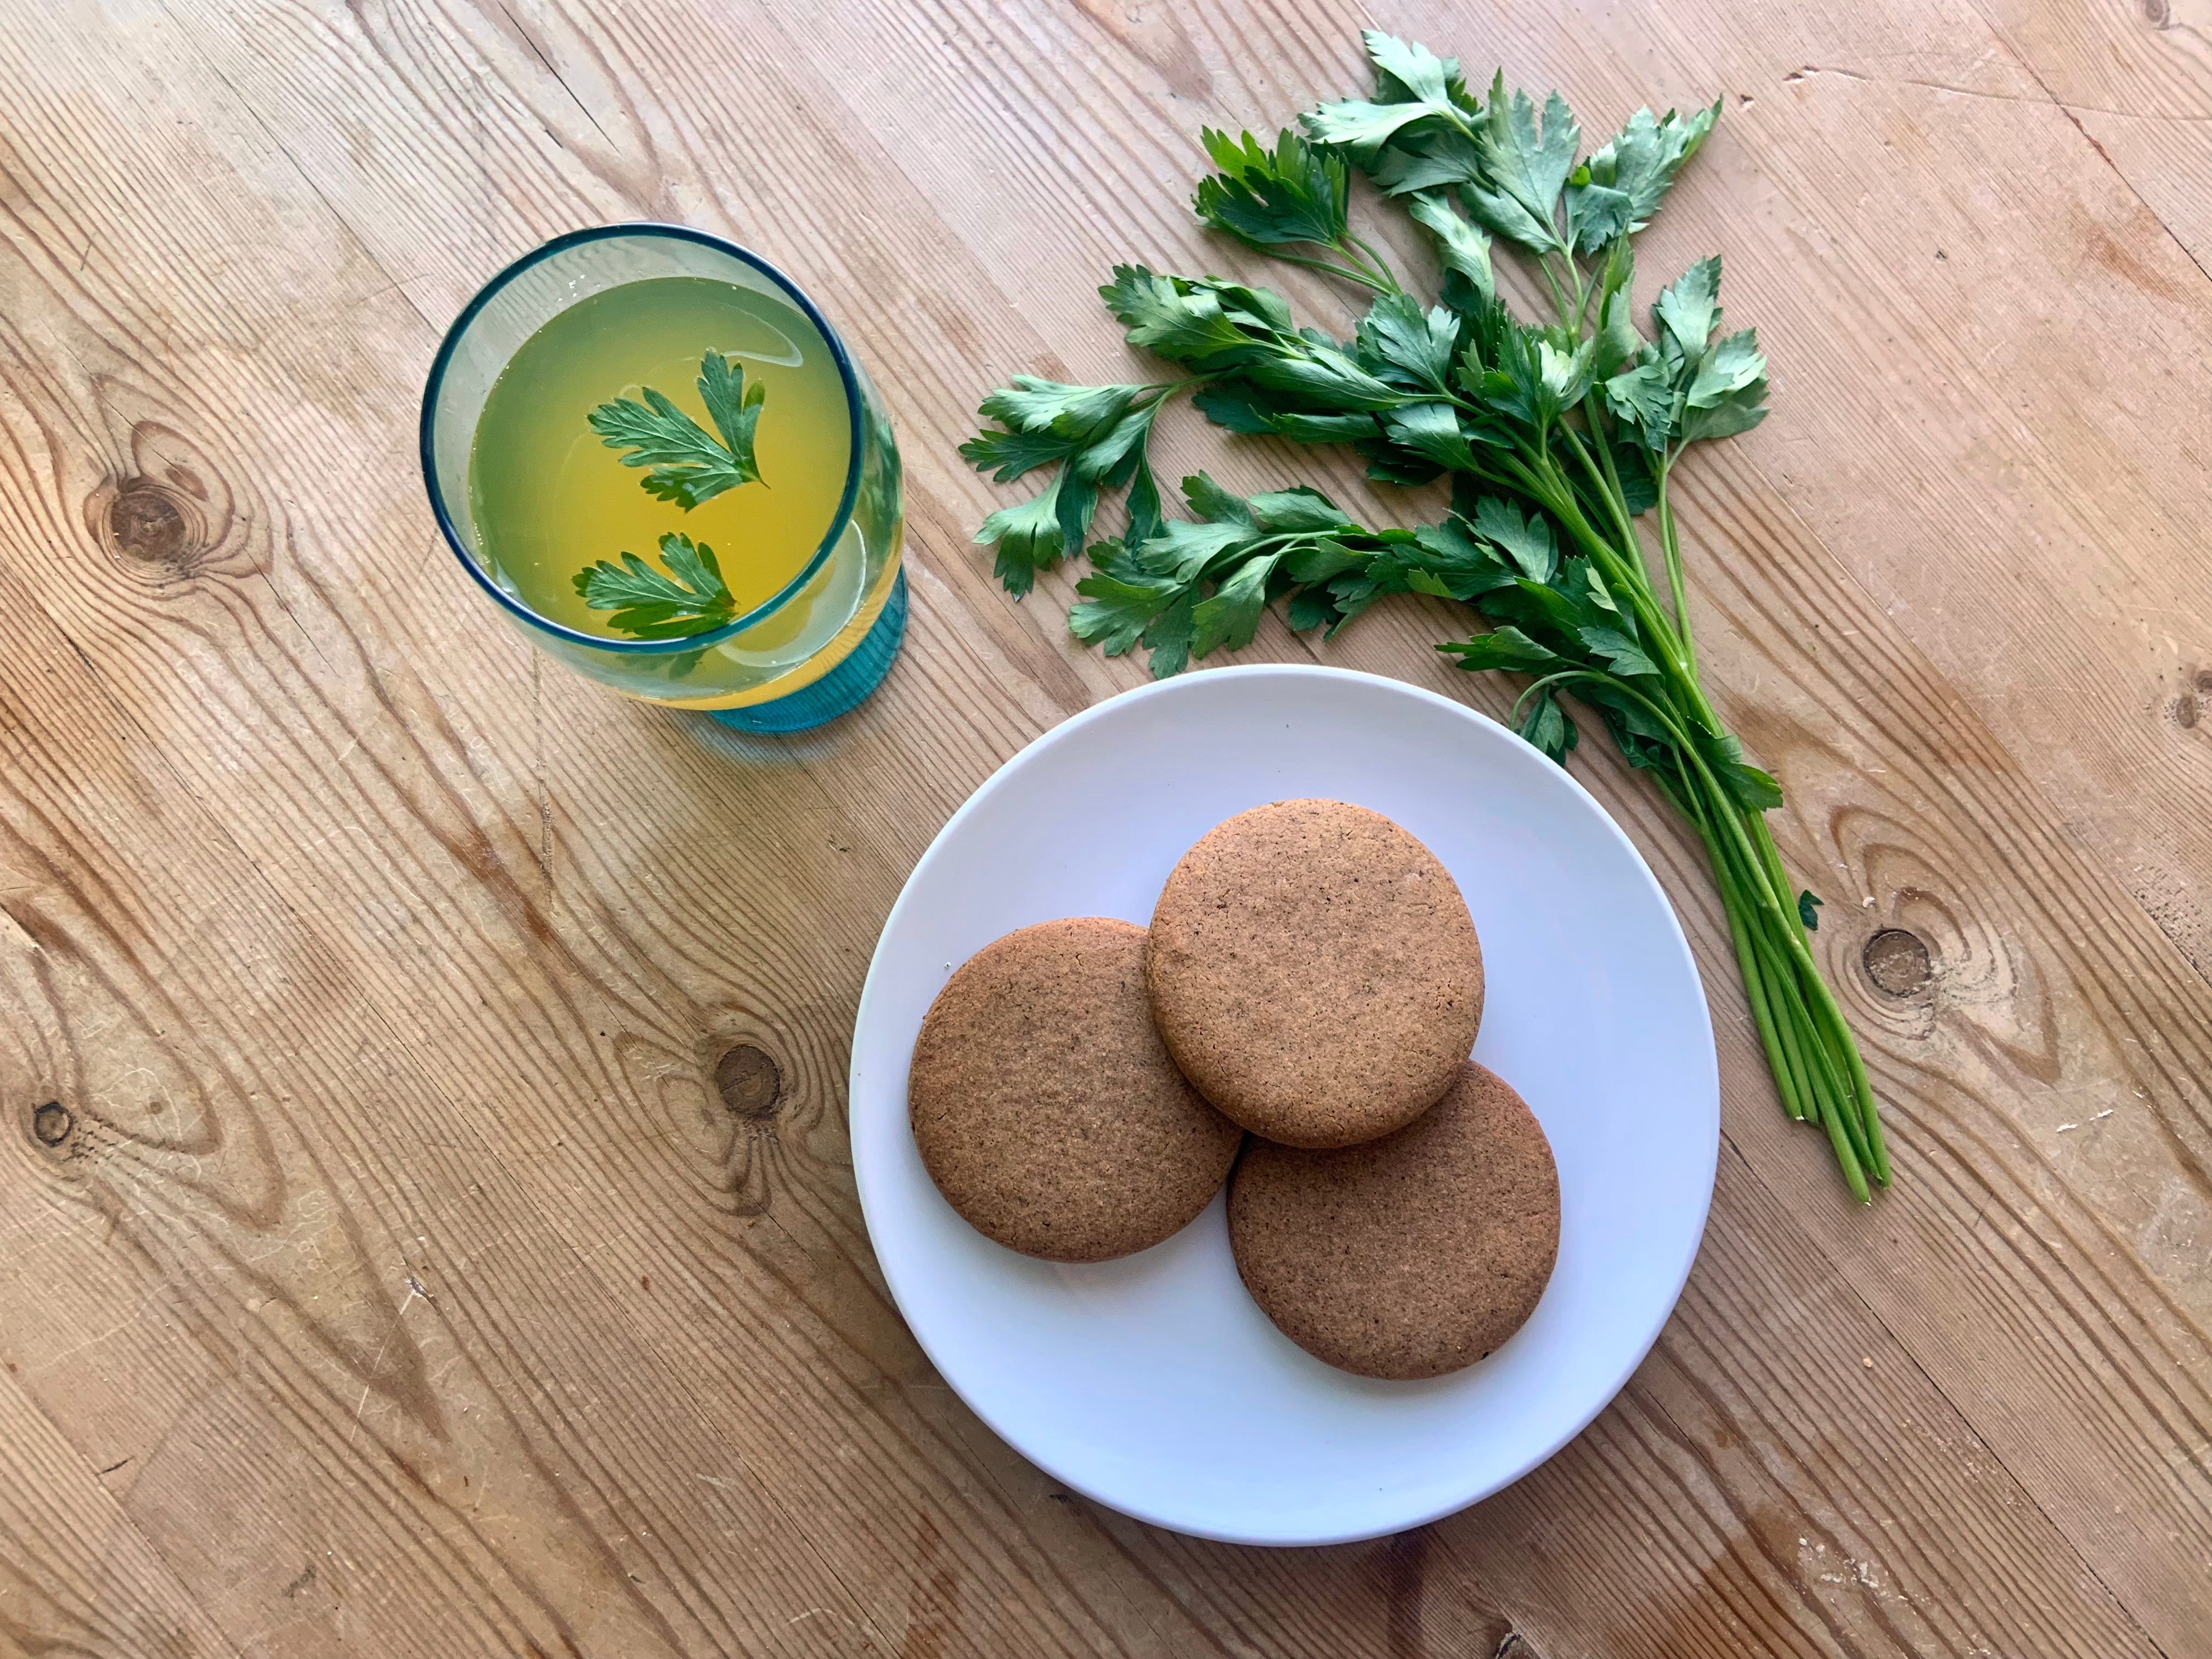 If you really need joy, pair your cookies with Hildegard's honey-parsley wine.